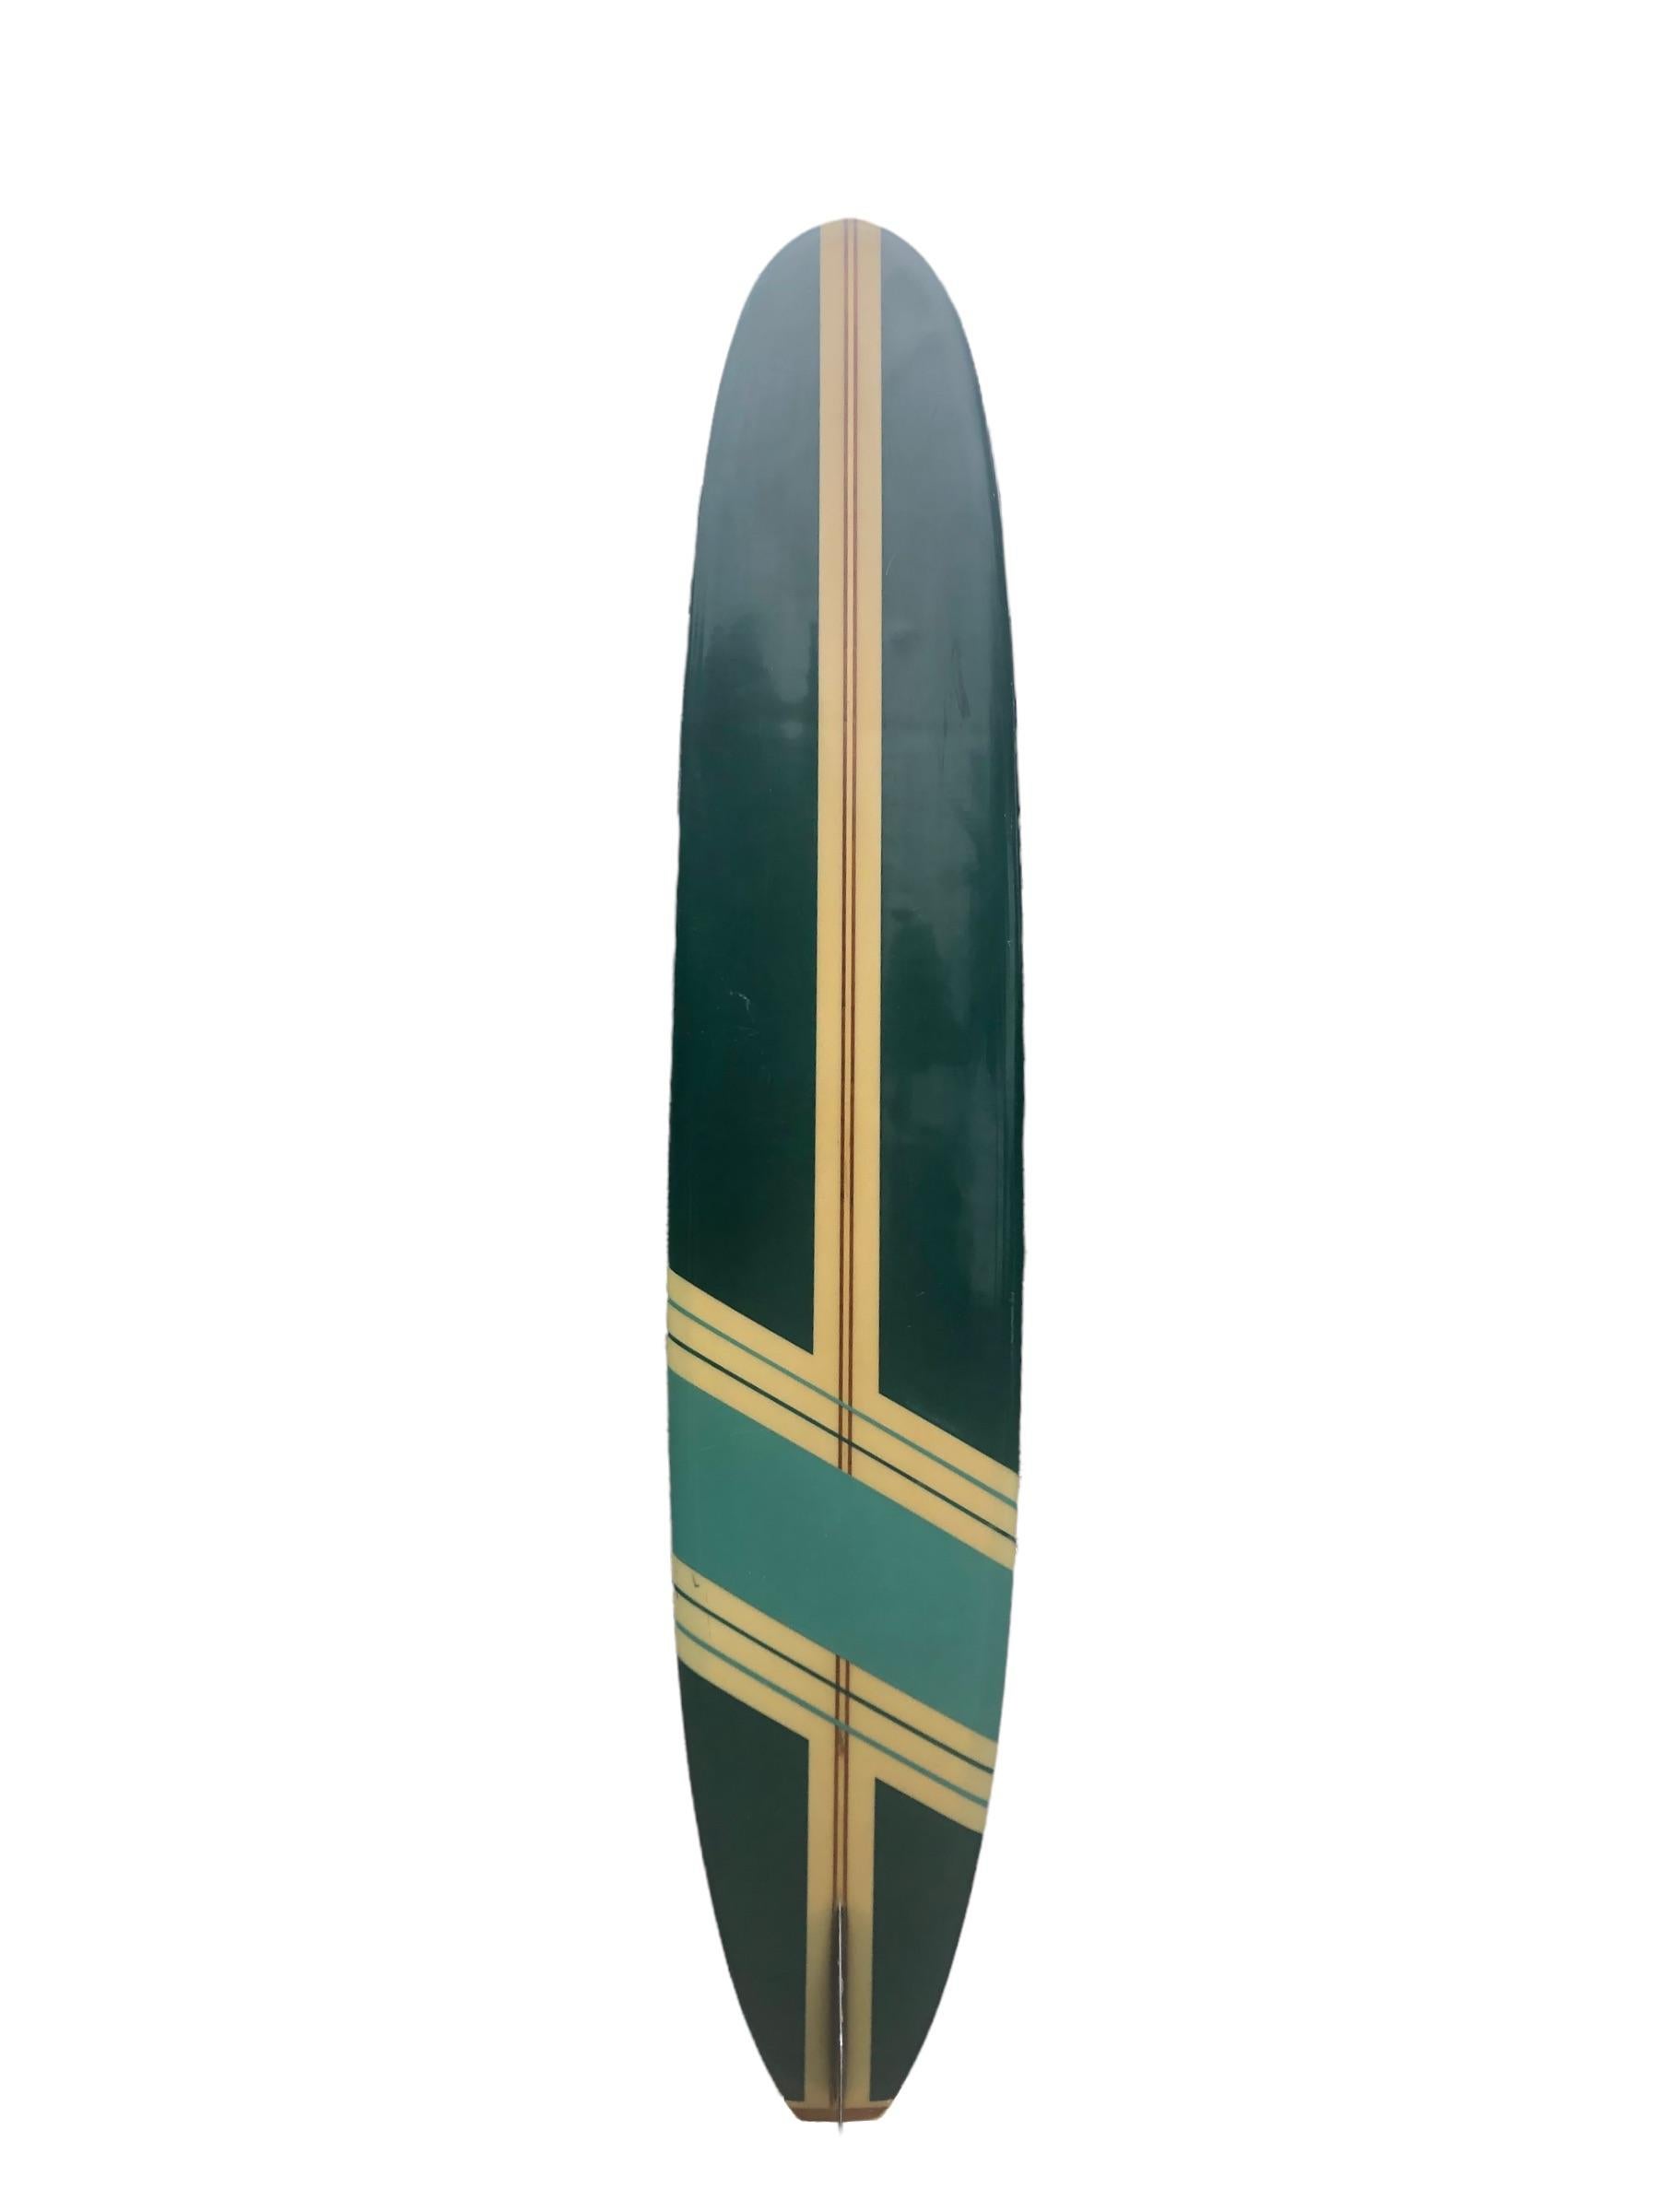 Mid-1960s Bing Surfboards competition longboard. This vintage longboard features a competition band indicating it was used in surfing contests during the 1960s. Beautiful dark green panels with ornate pin line design. Redwood and balsawood T-band